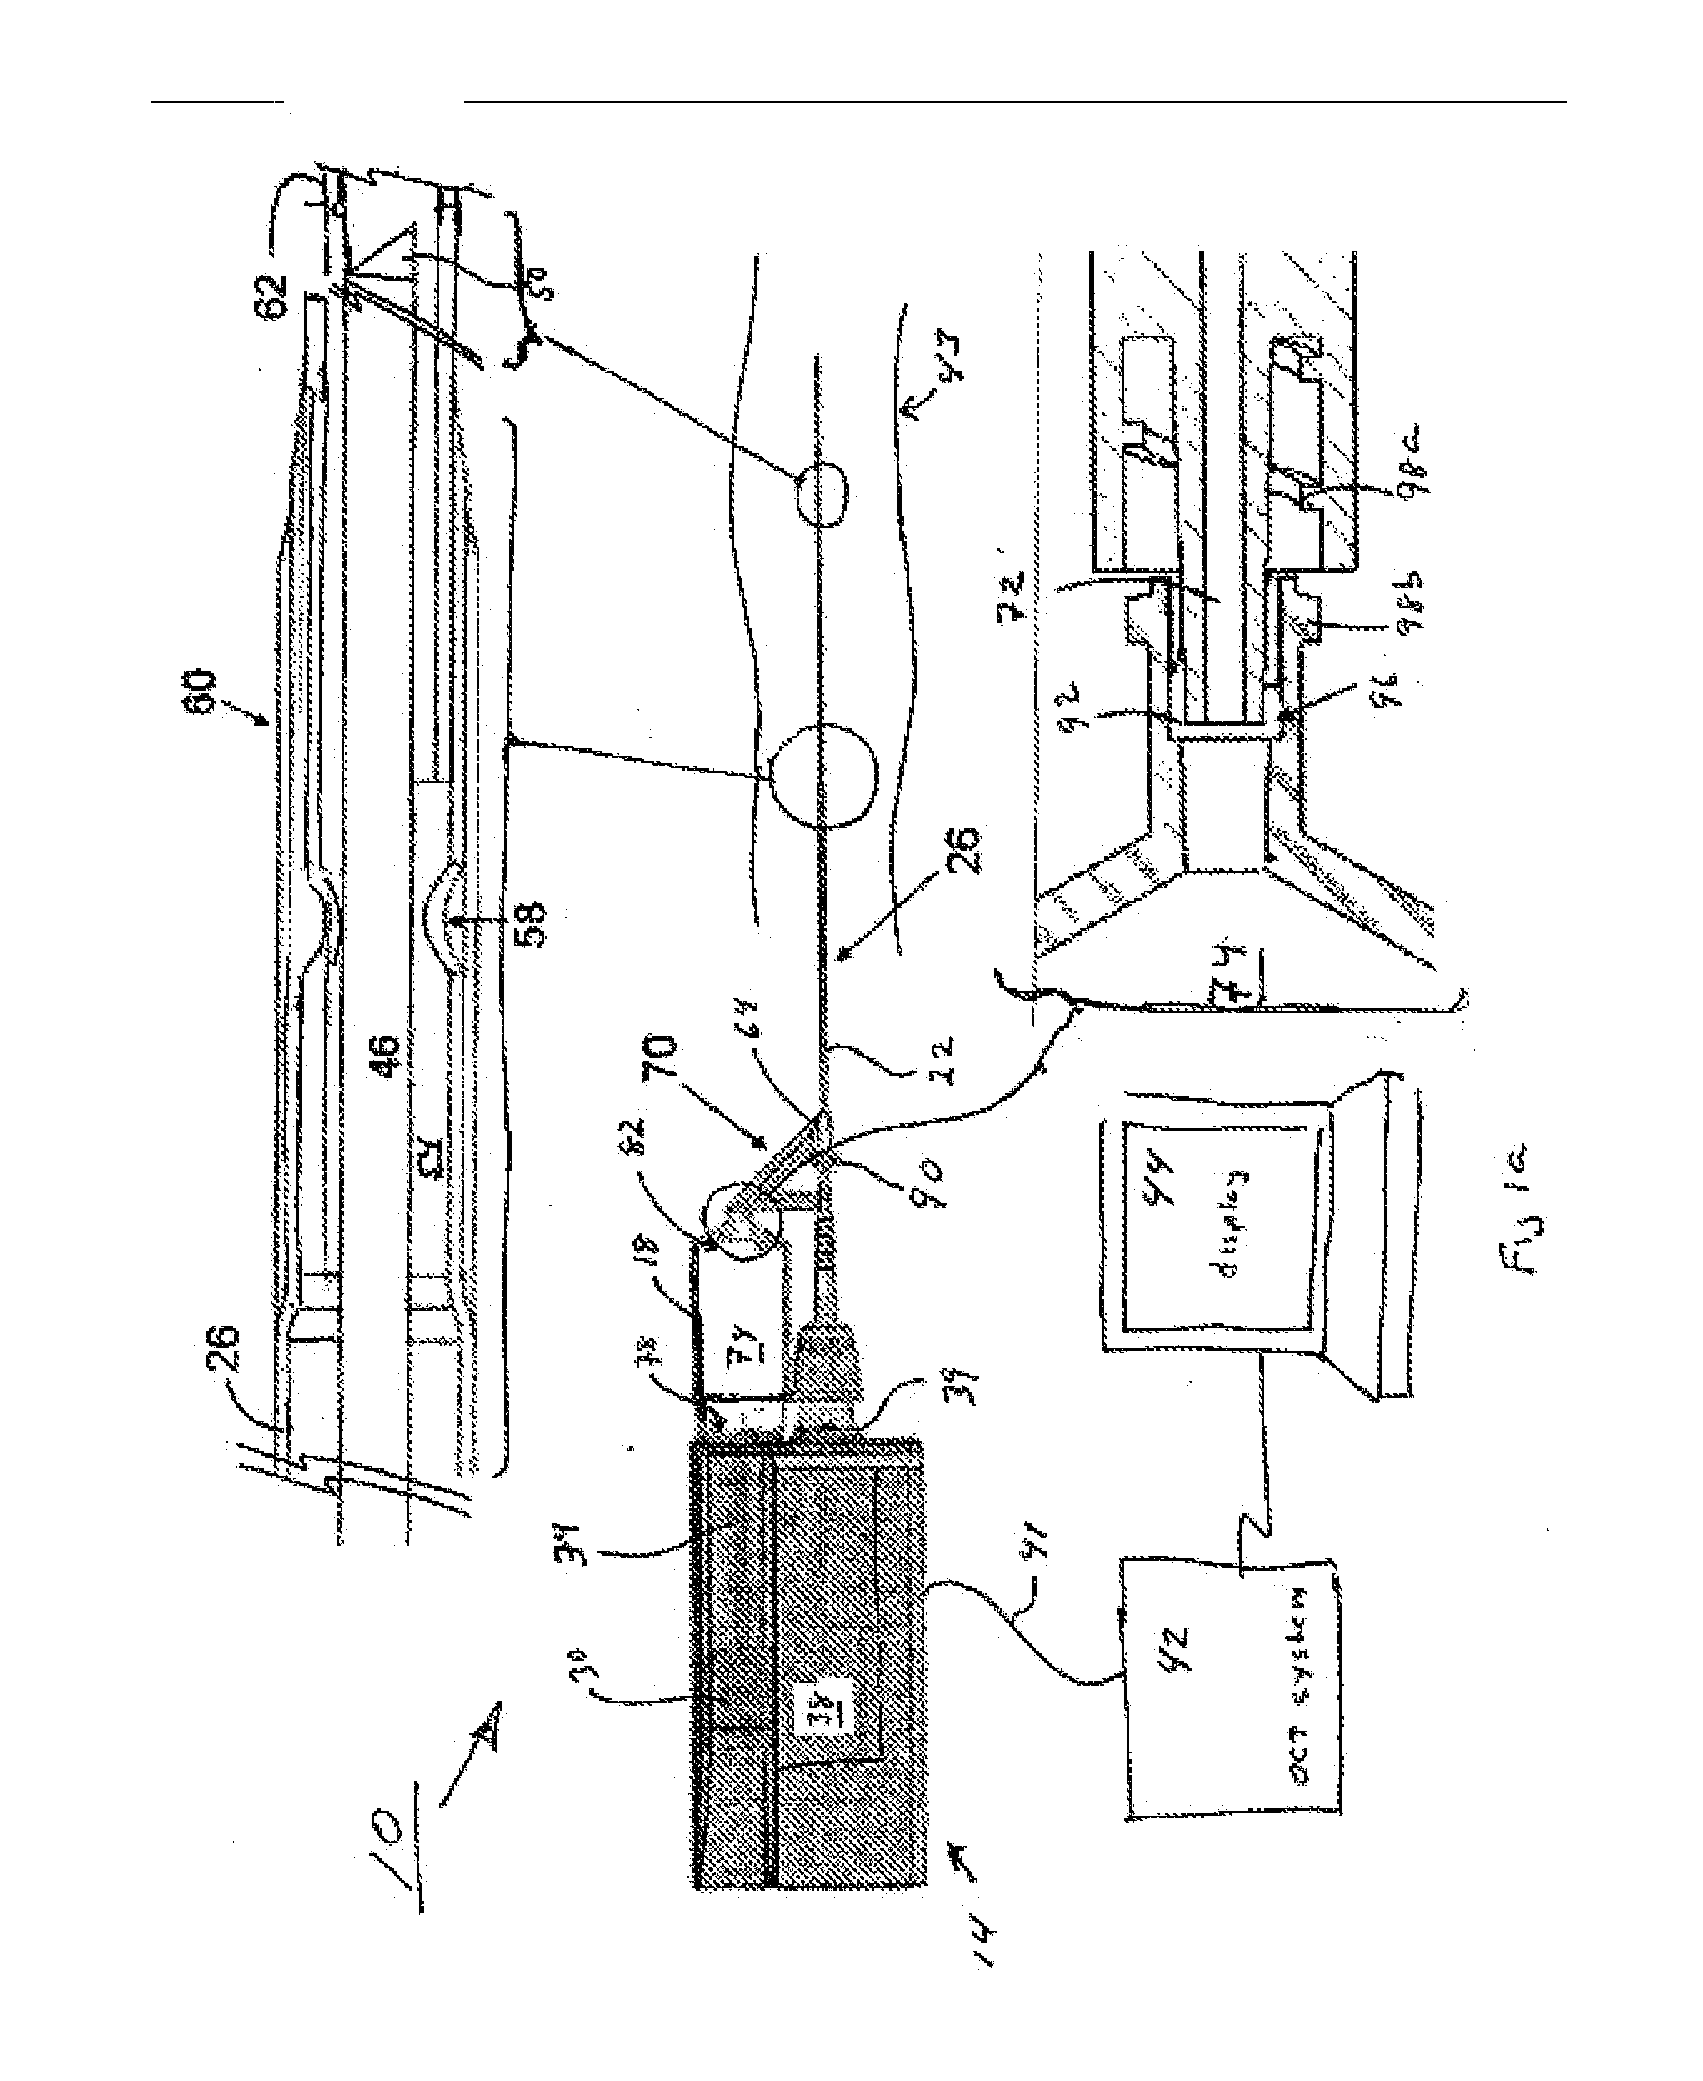 Automated Fluid Delivery Catheter and System